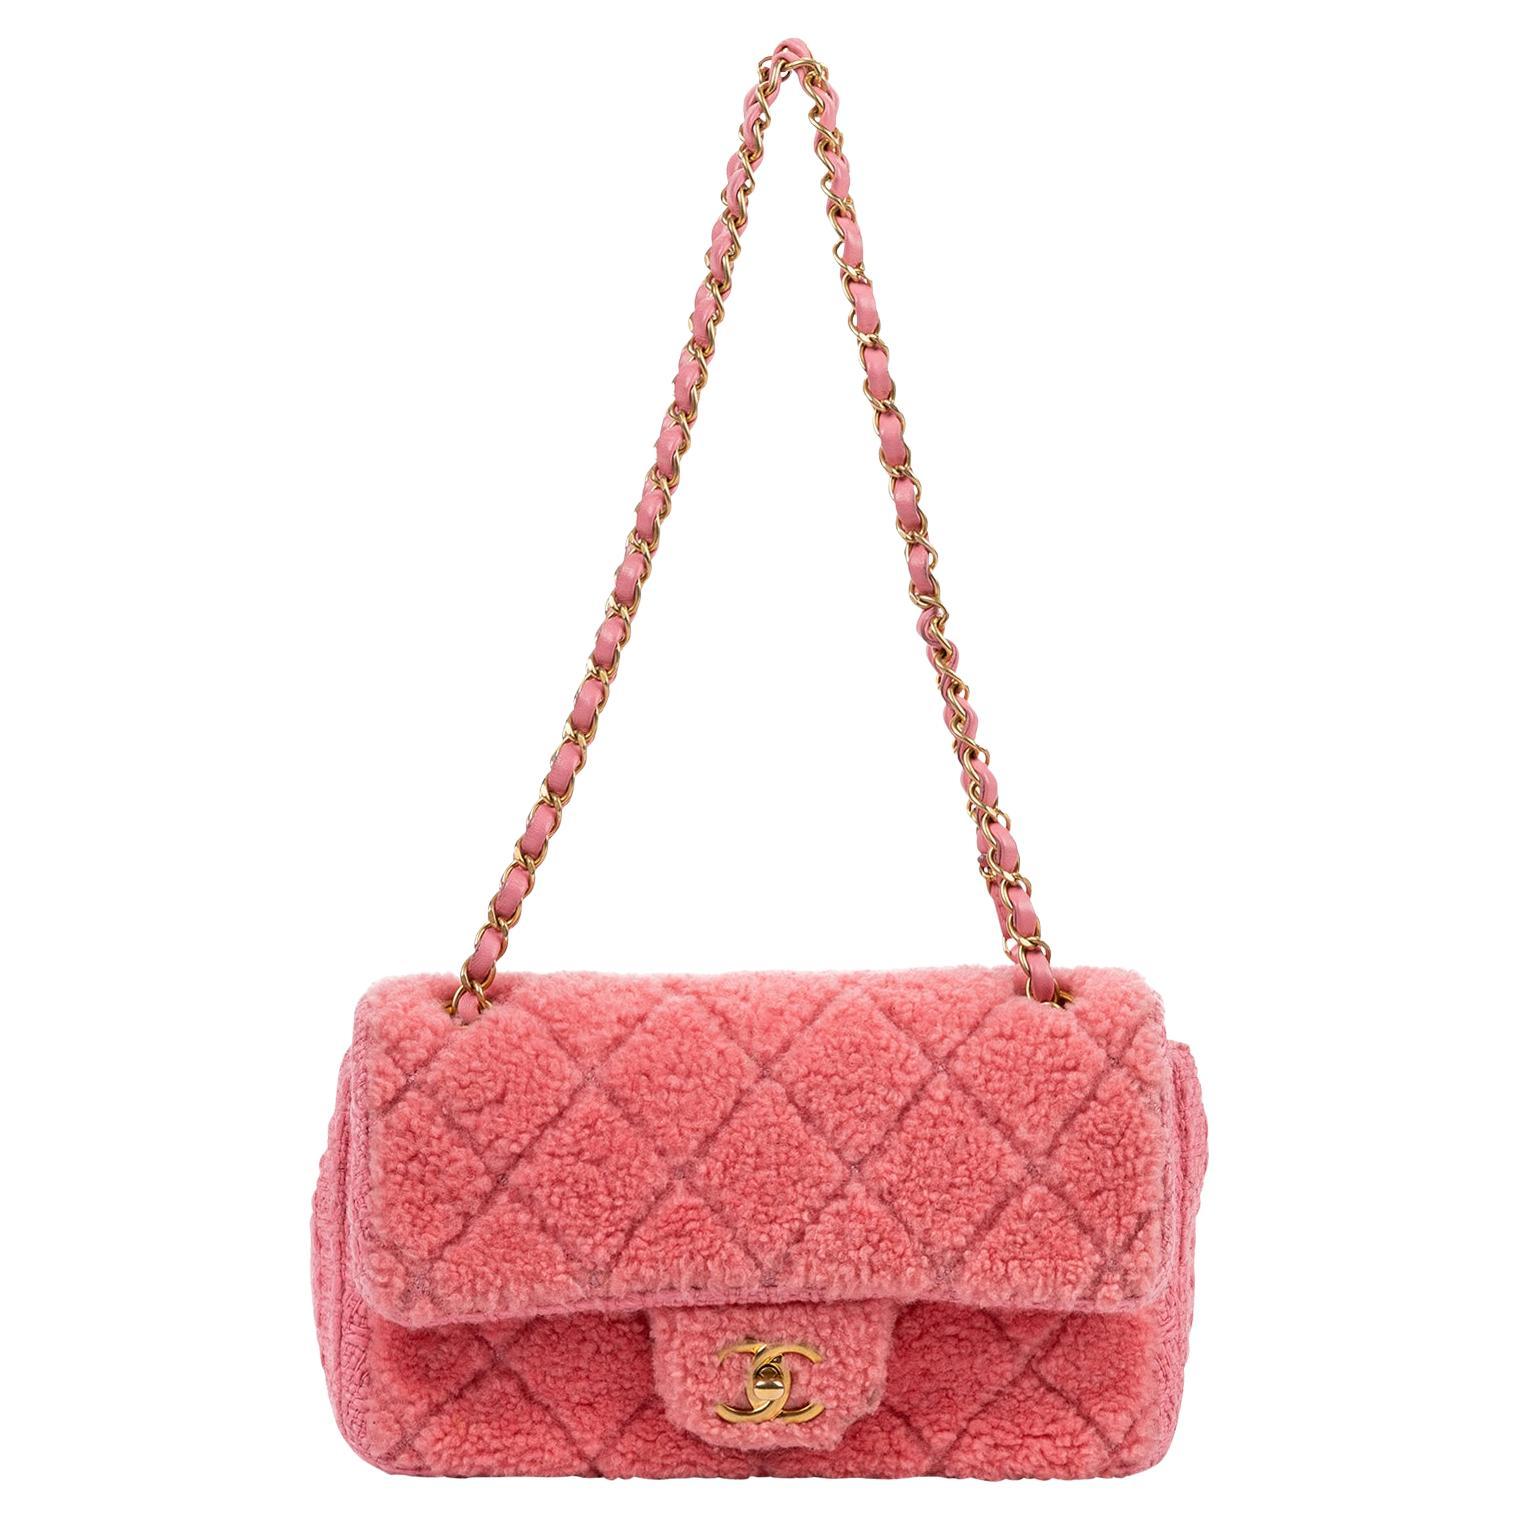 Chanel 2020 Limited Edition Pink Tweed Furry Flap Bag